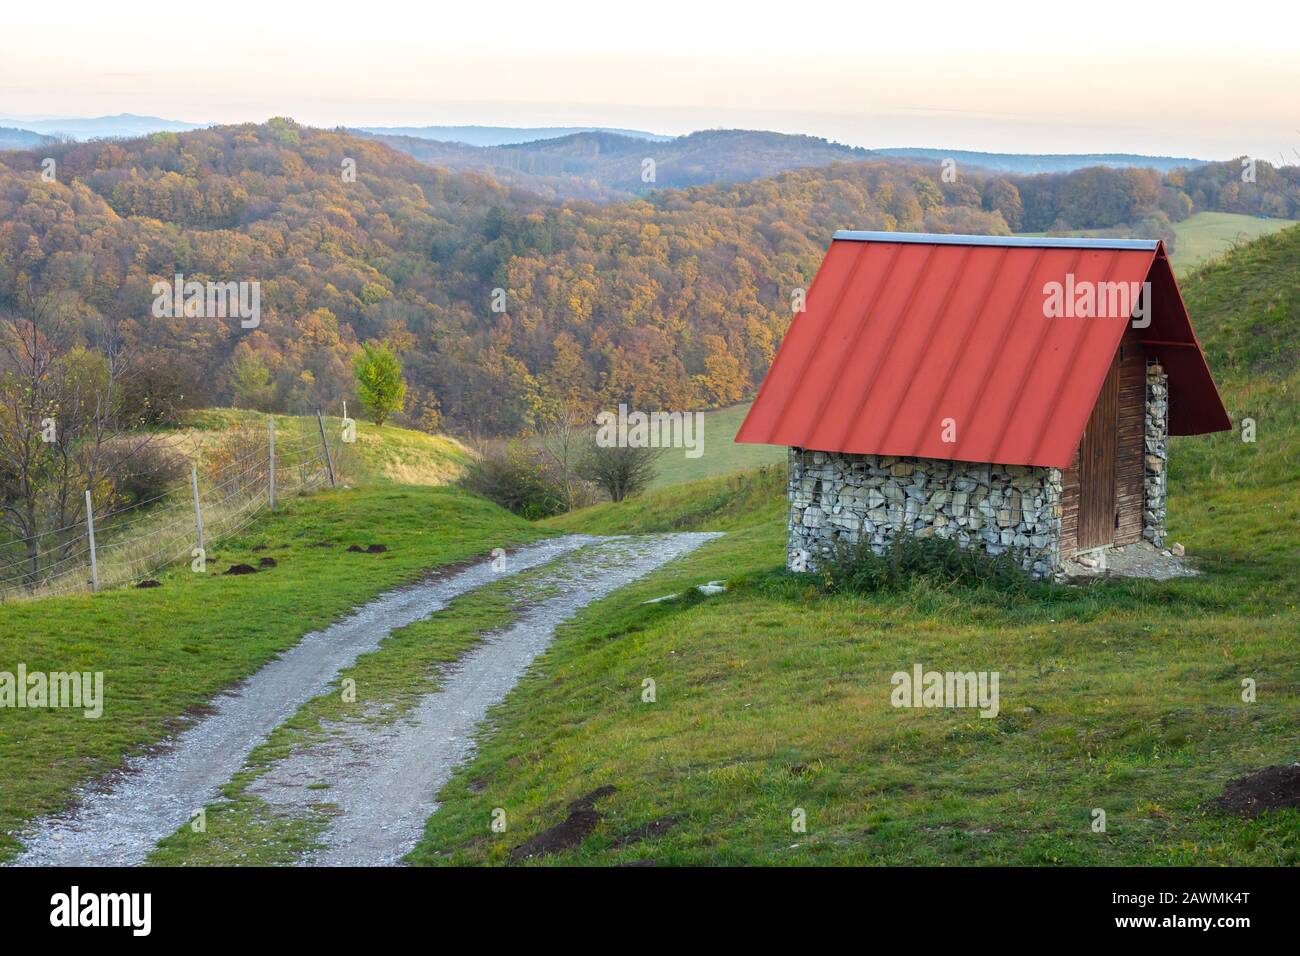 little hut with red roof and dirt road in beautiful forest landscape Stock Photo